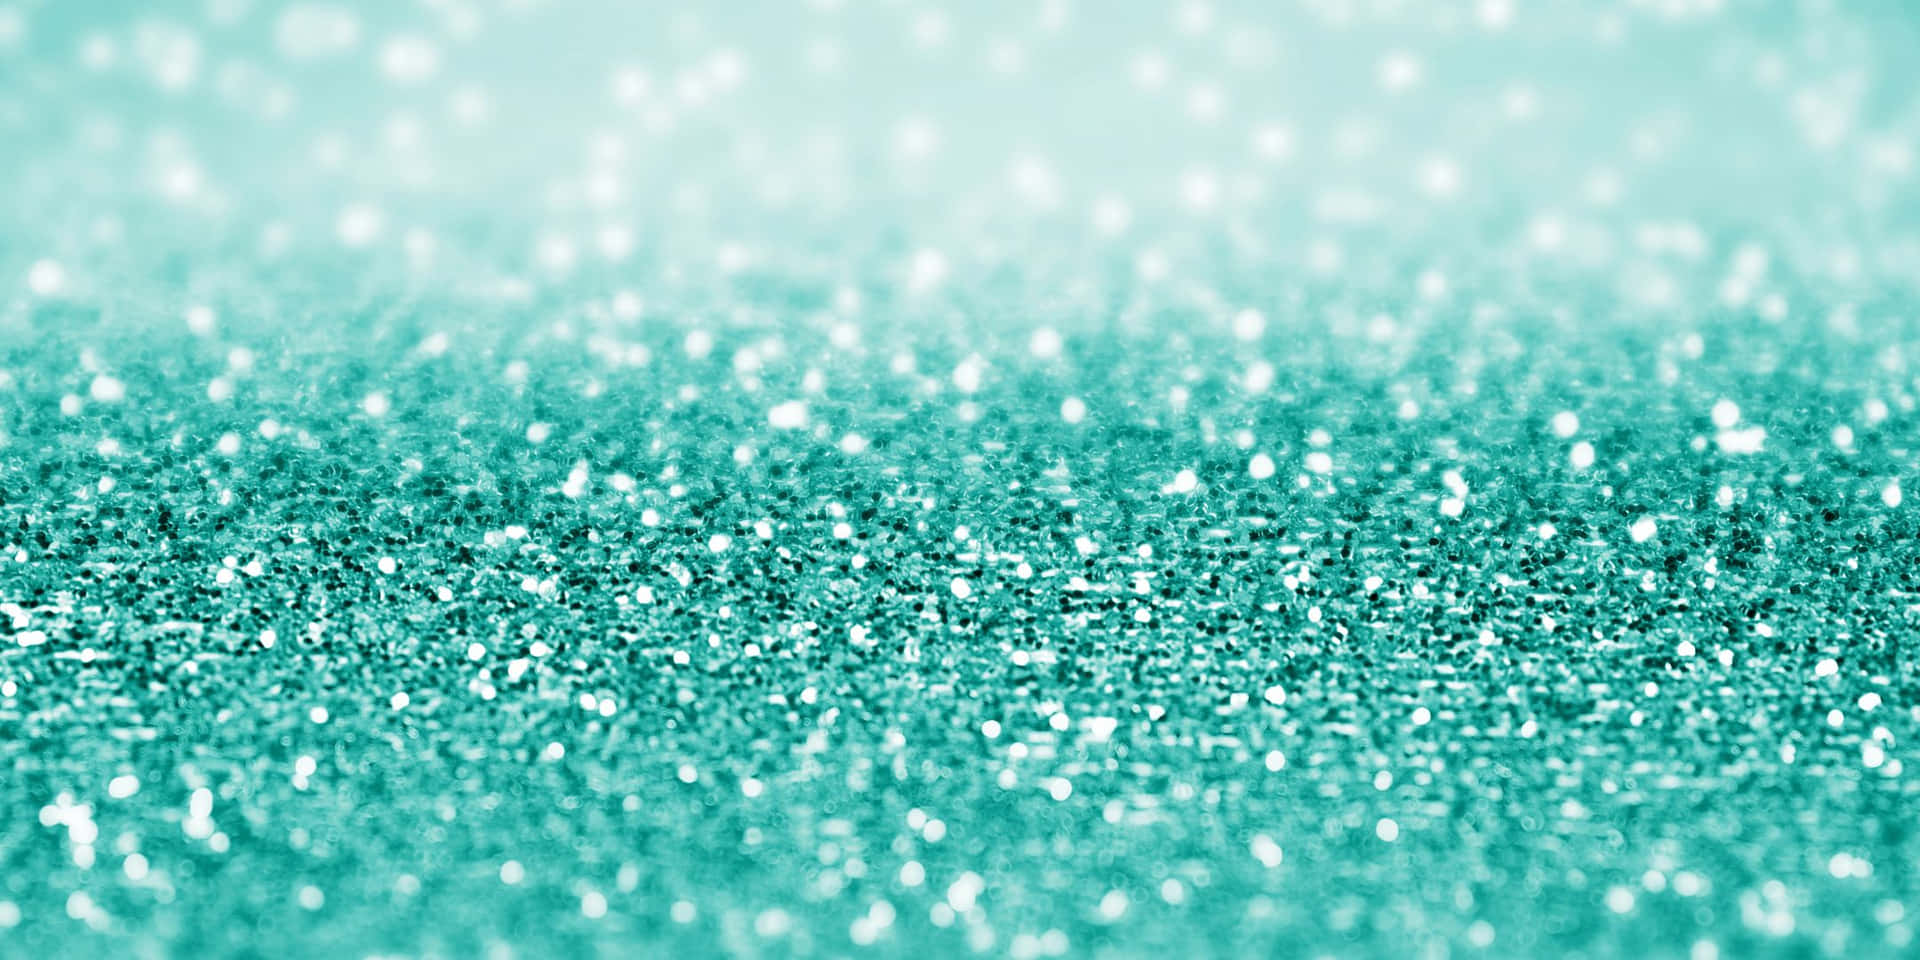 Sparkling teal glitter on an abstract blue and green background.